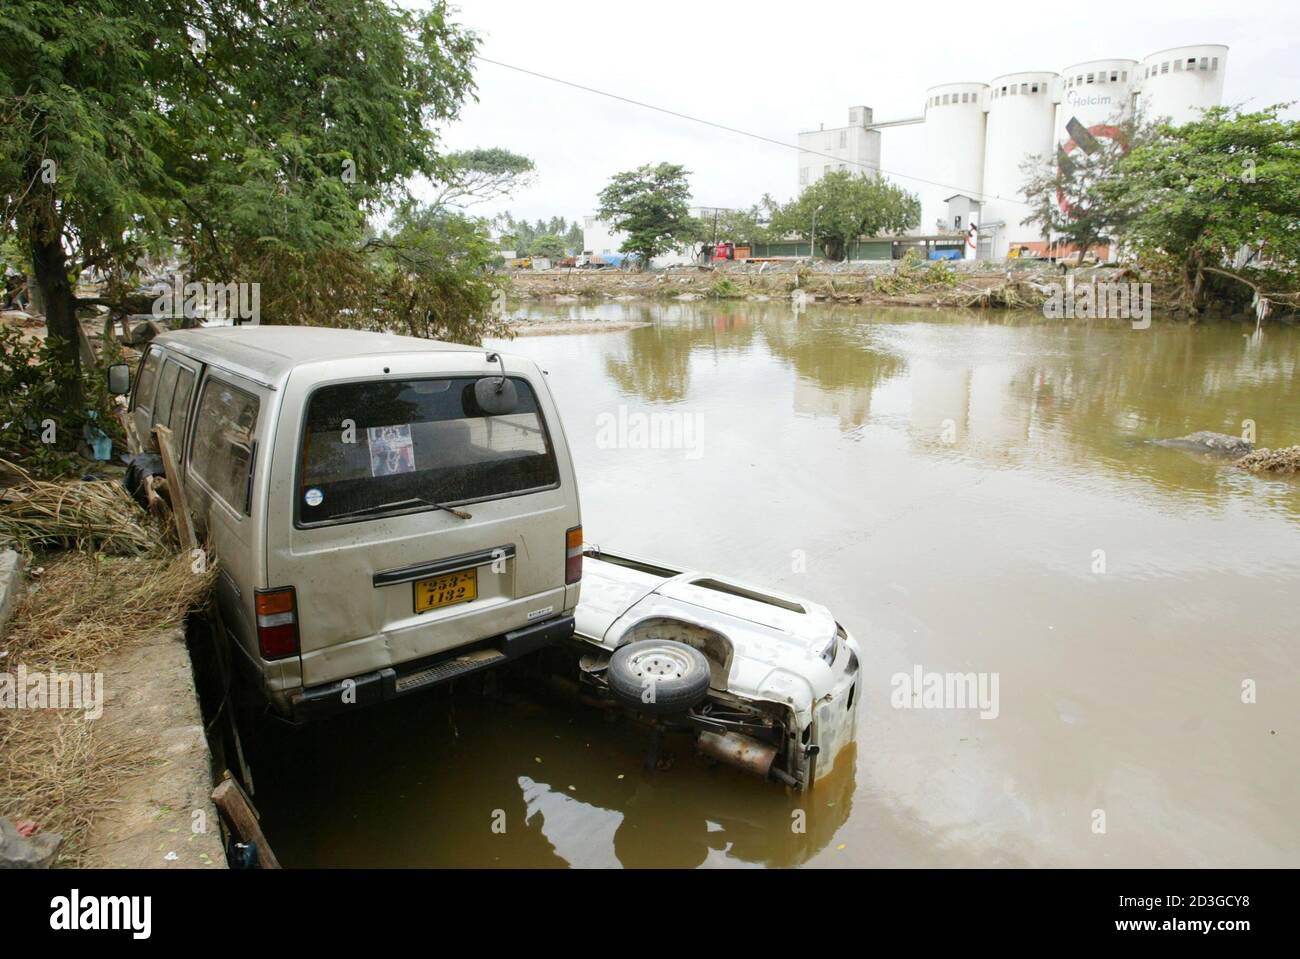 Damaged vans lie on a flooded street in Unawatuna, 6 km (3.7 miles) south  of Galle, Sri Lanka December 28, 2004 after a tsunami hit the area over the  weekend. Nations on